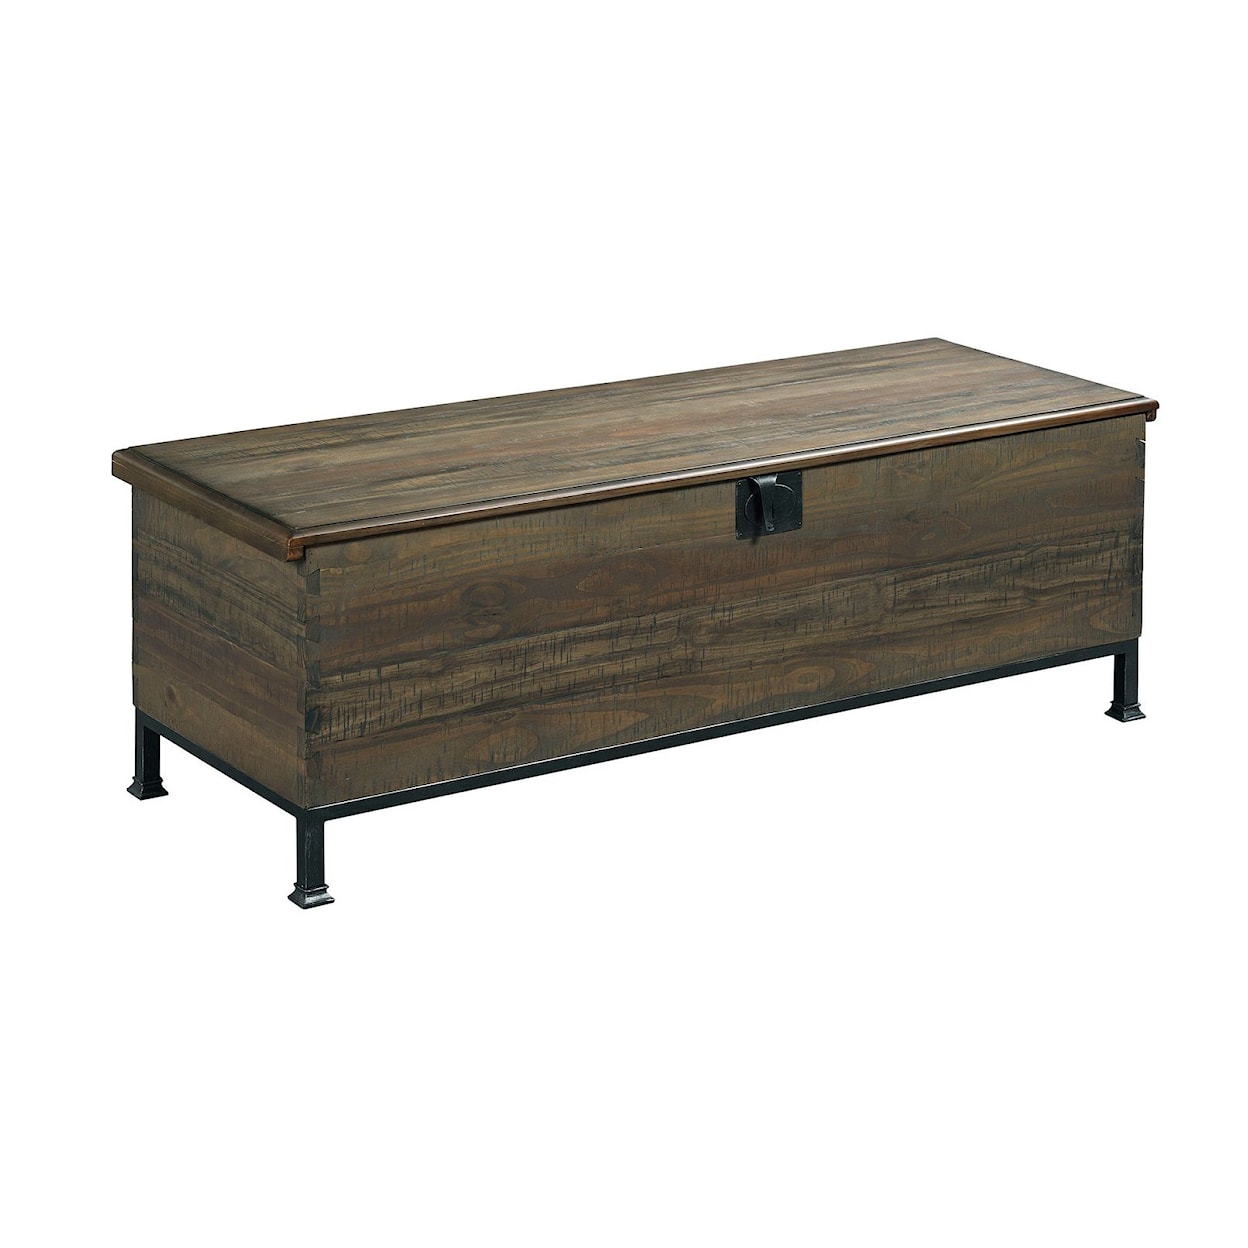 Hammary Hidden Treasures Milling Chest Cocktail Table